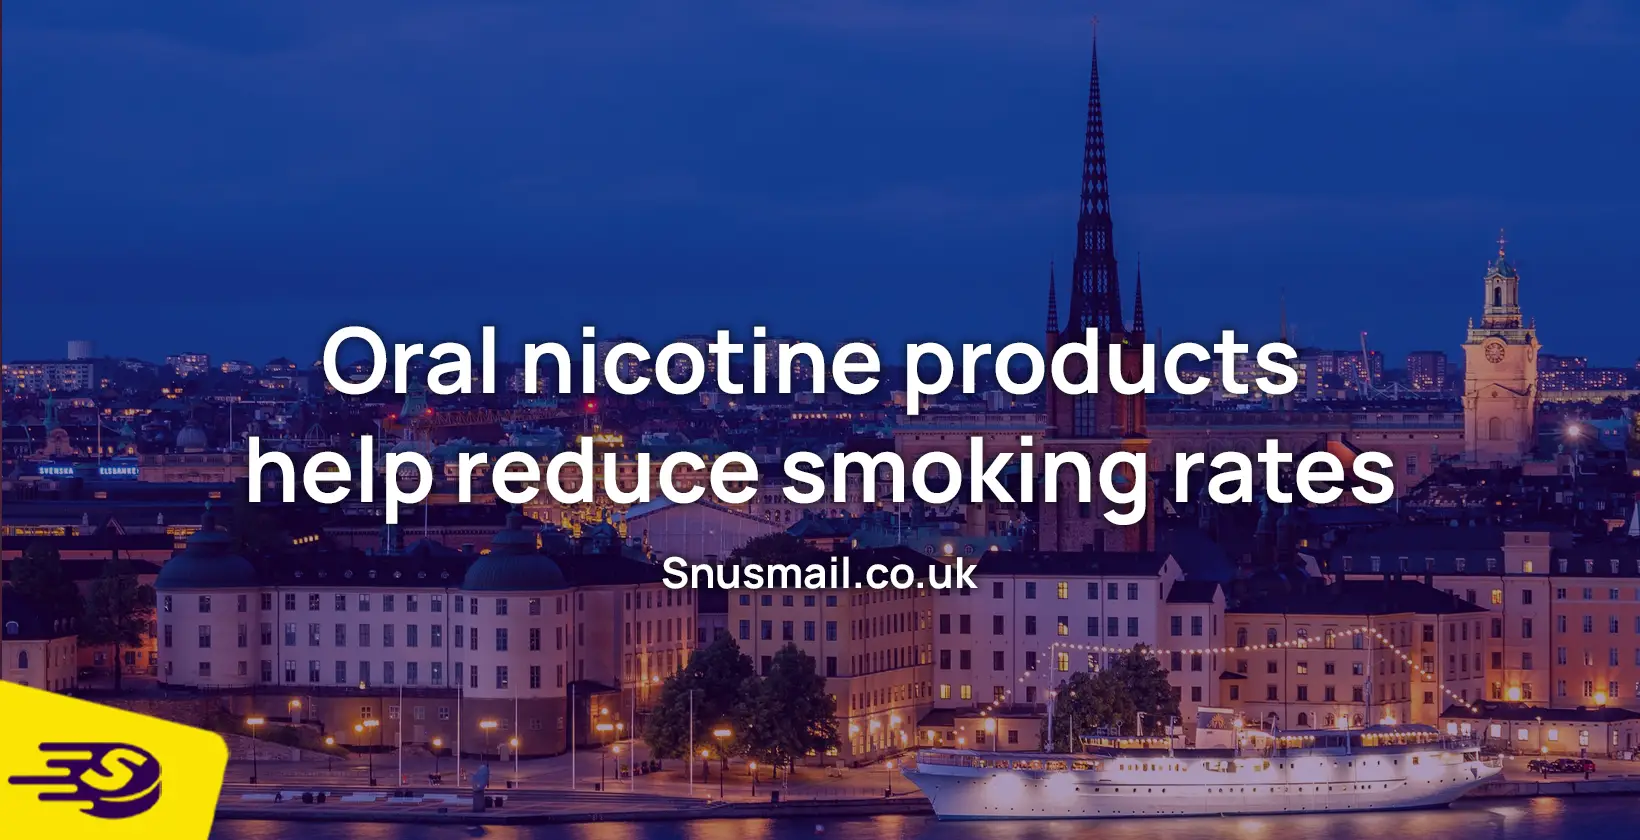 Oral nicotine products help reduce smoking rates